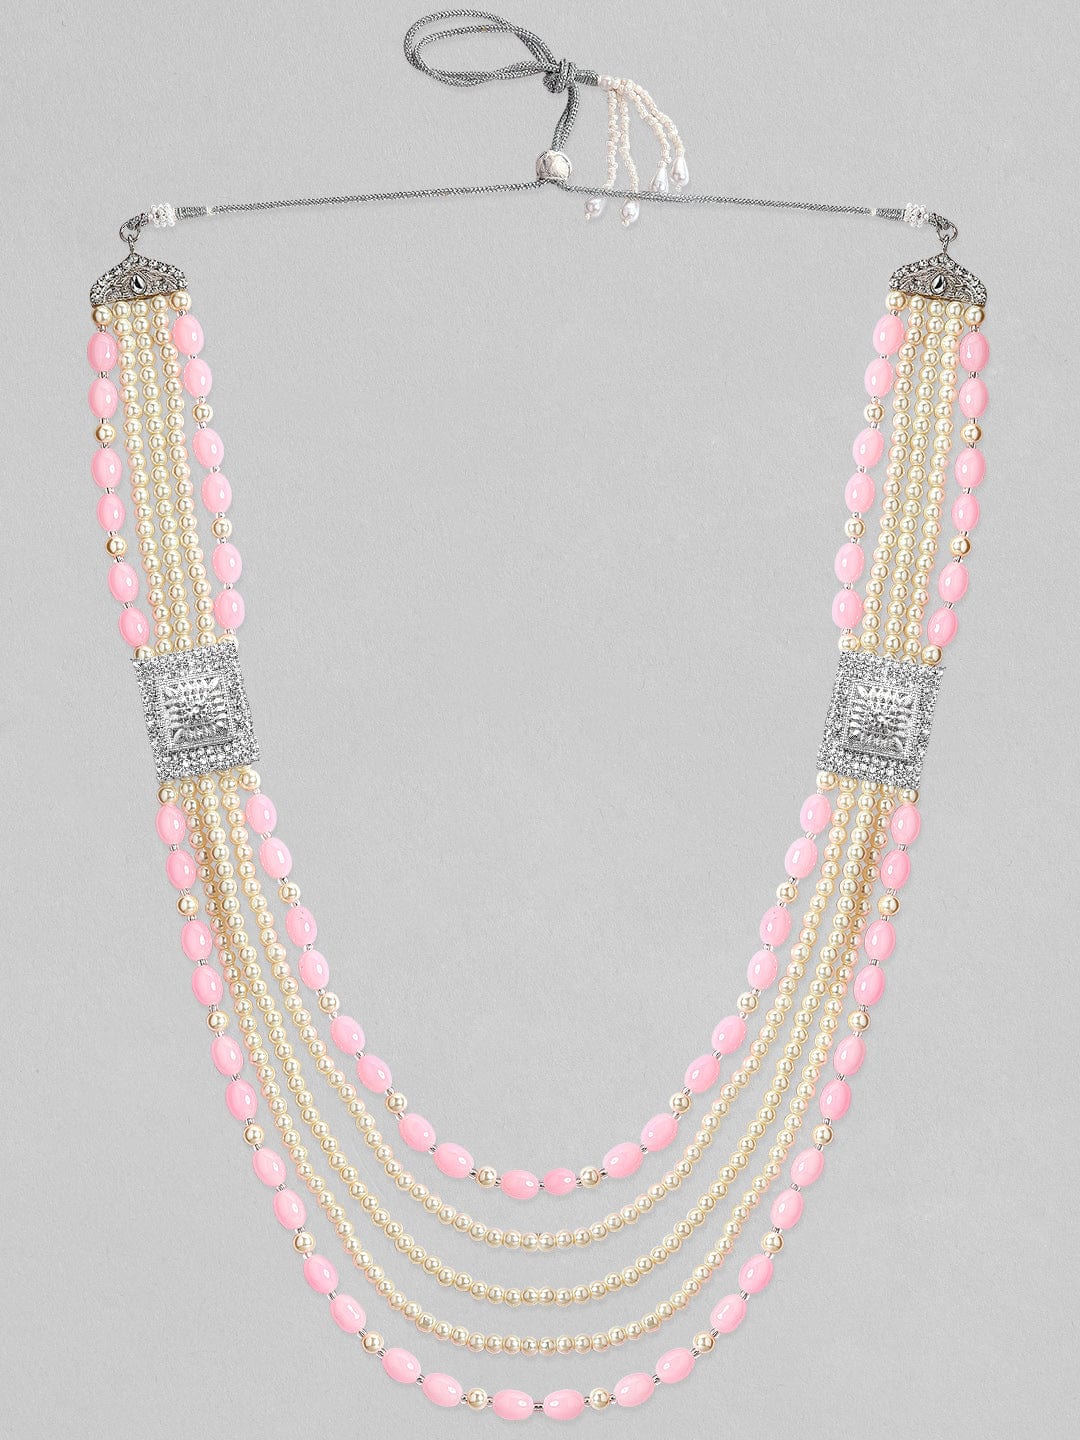 2-pack beaded necklaces - Pink/Khaki green - Men | H&M IN